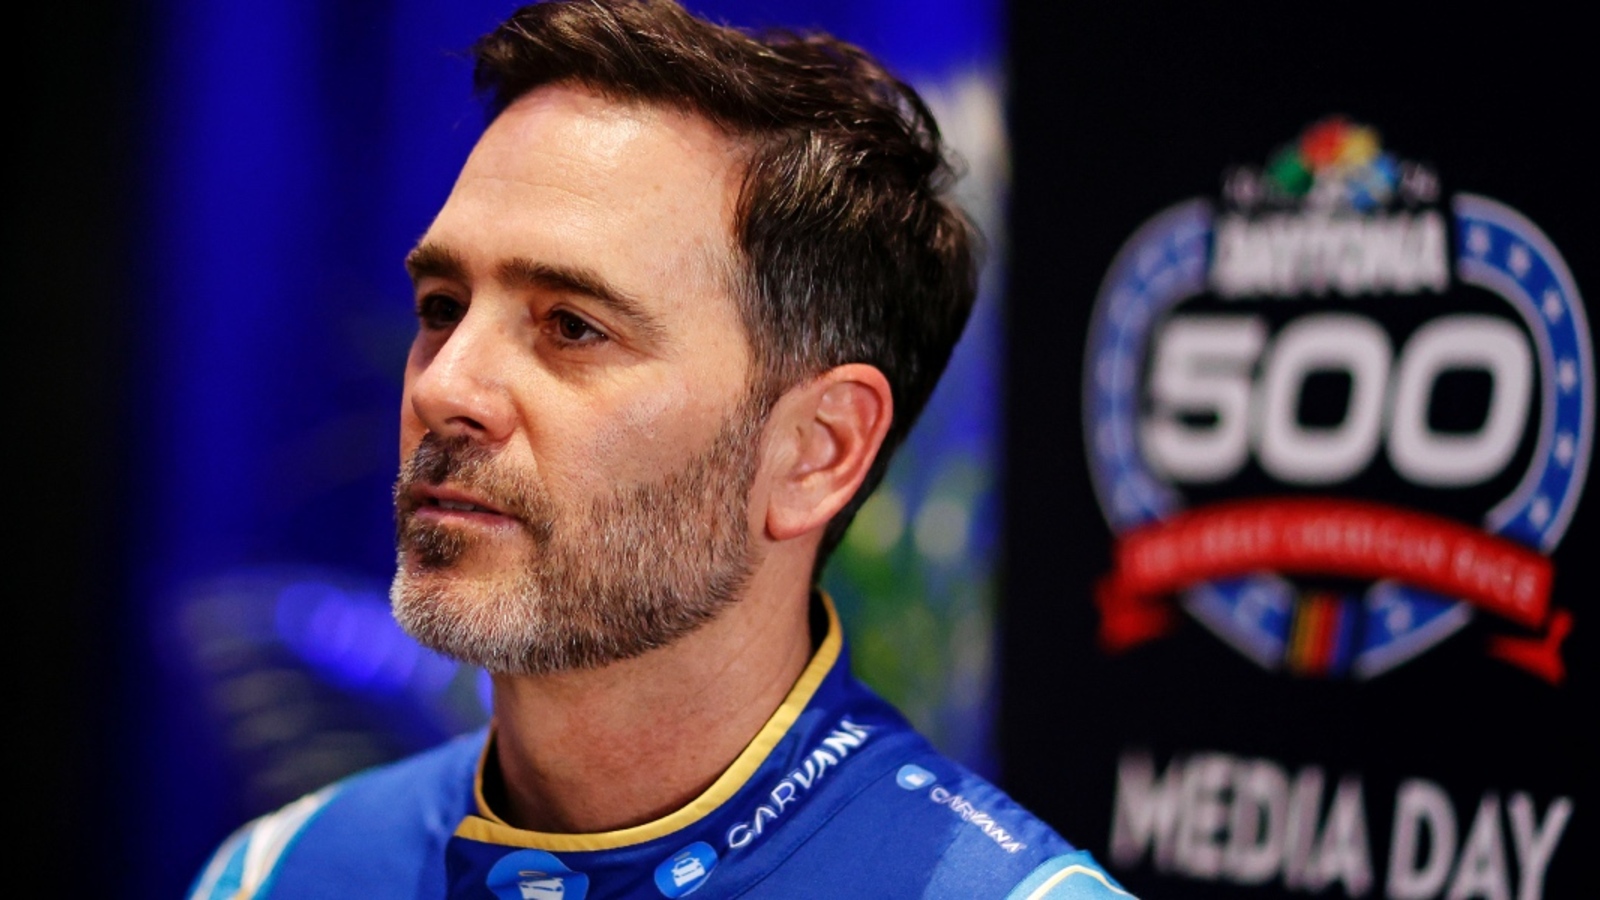 Jimmie Johnson reveals whether his winless streak is a motivating factor for return to NASCAR